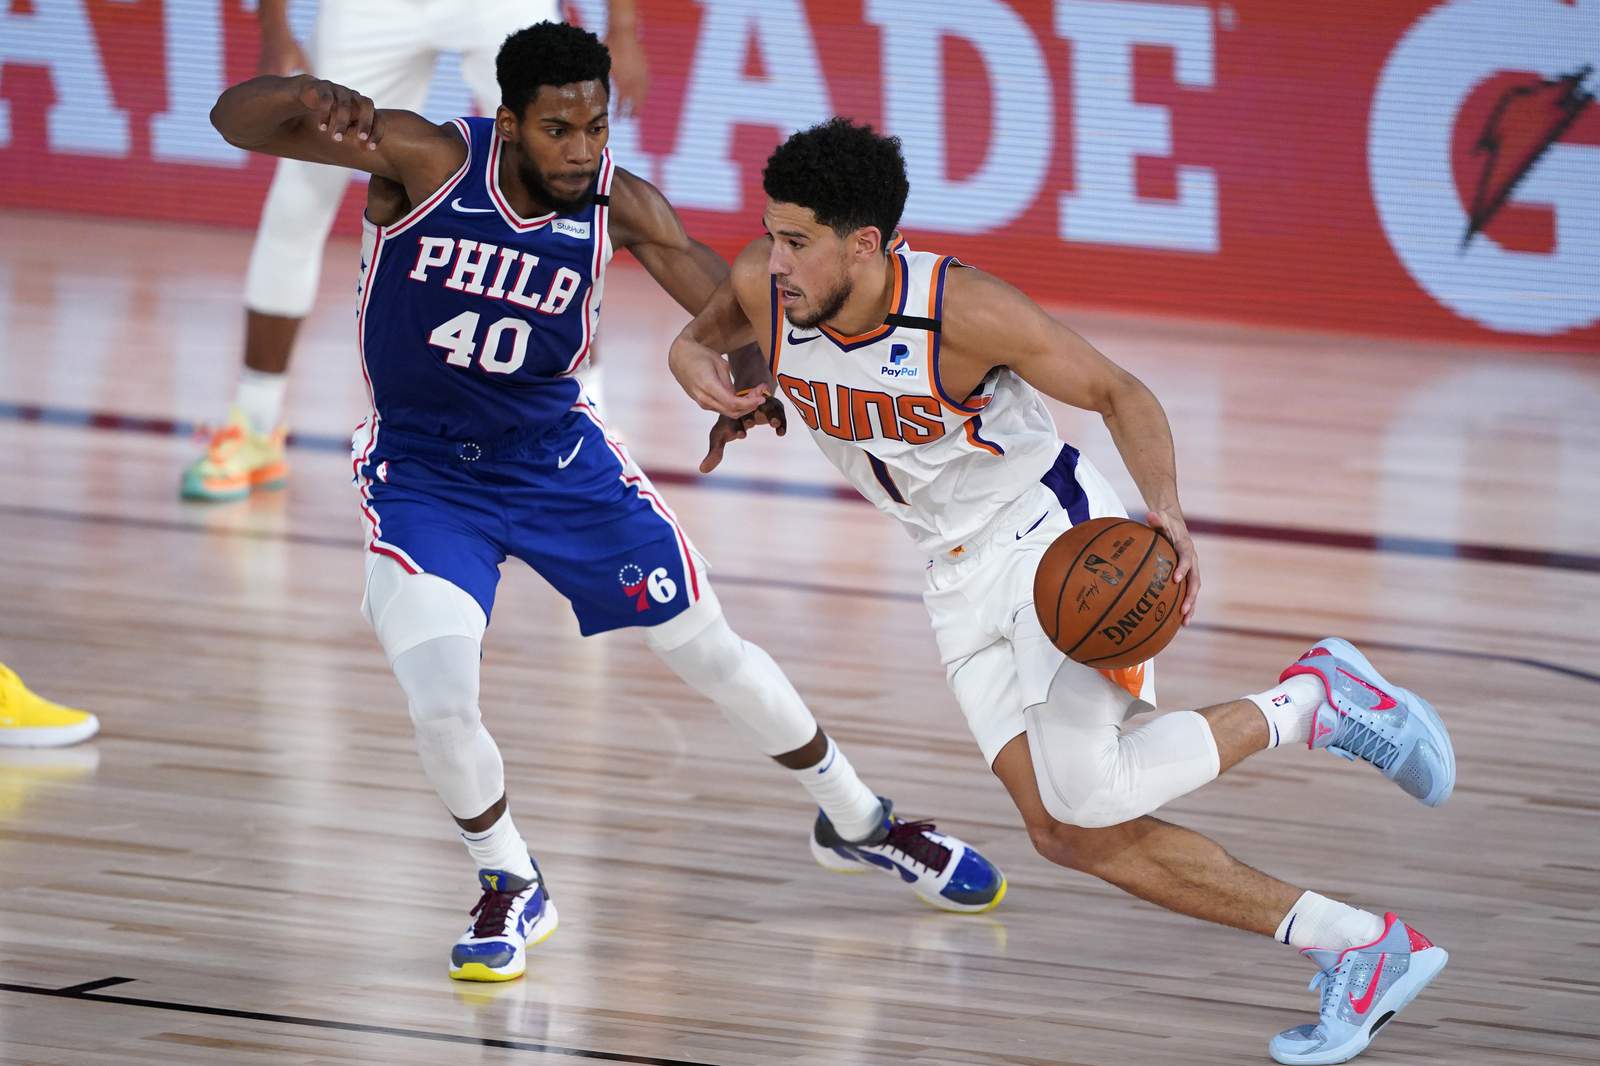 Booker's 35 points help streaking Suns beat 76ers 130-117